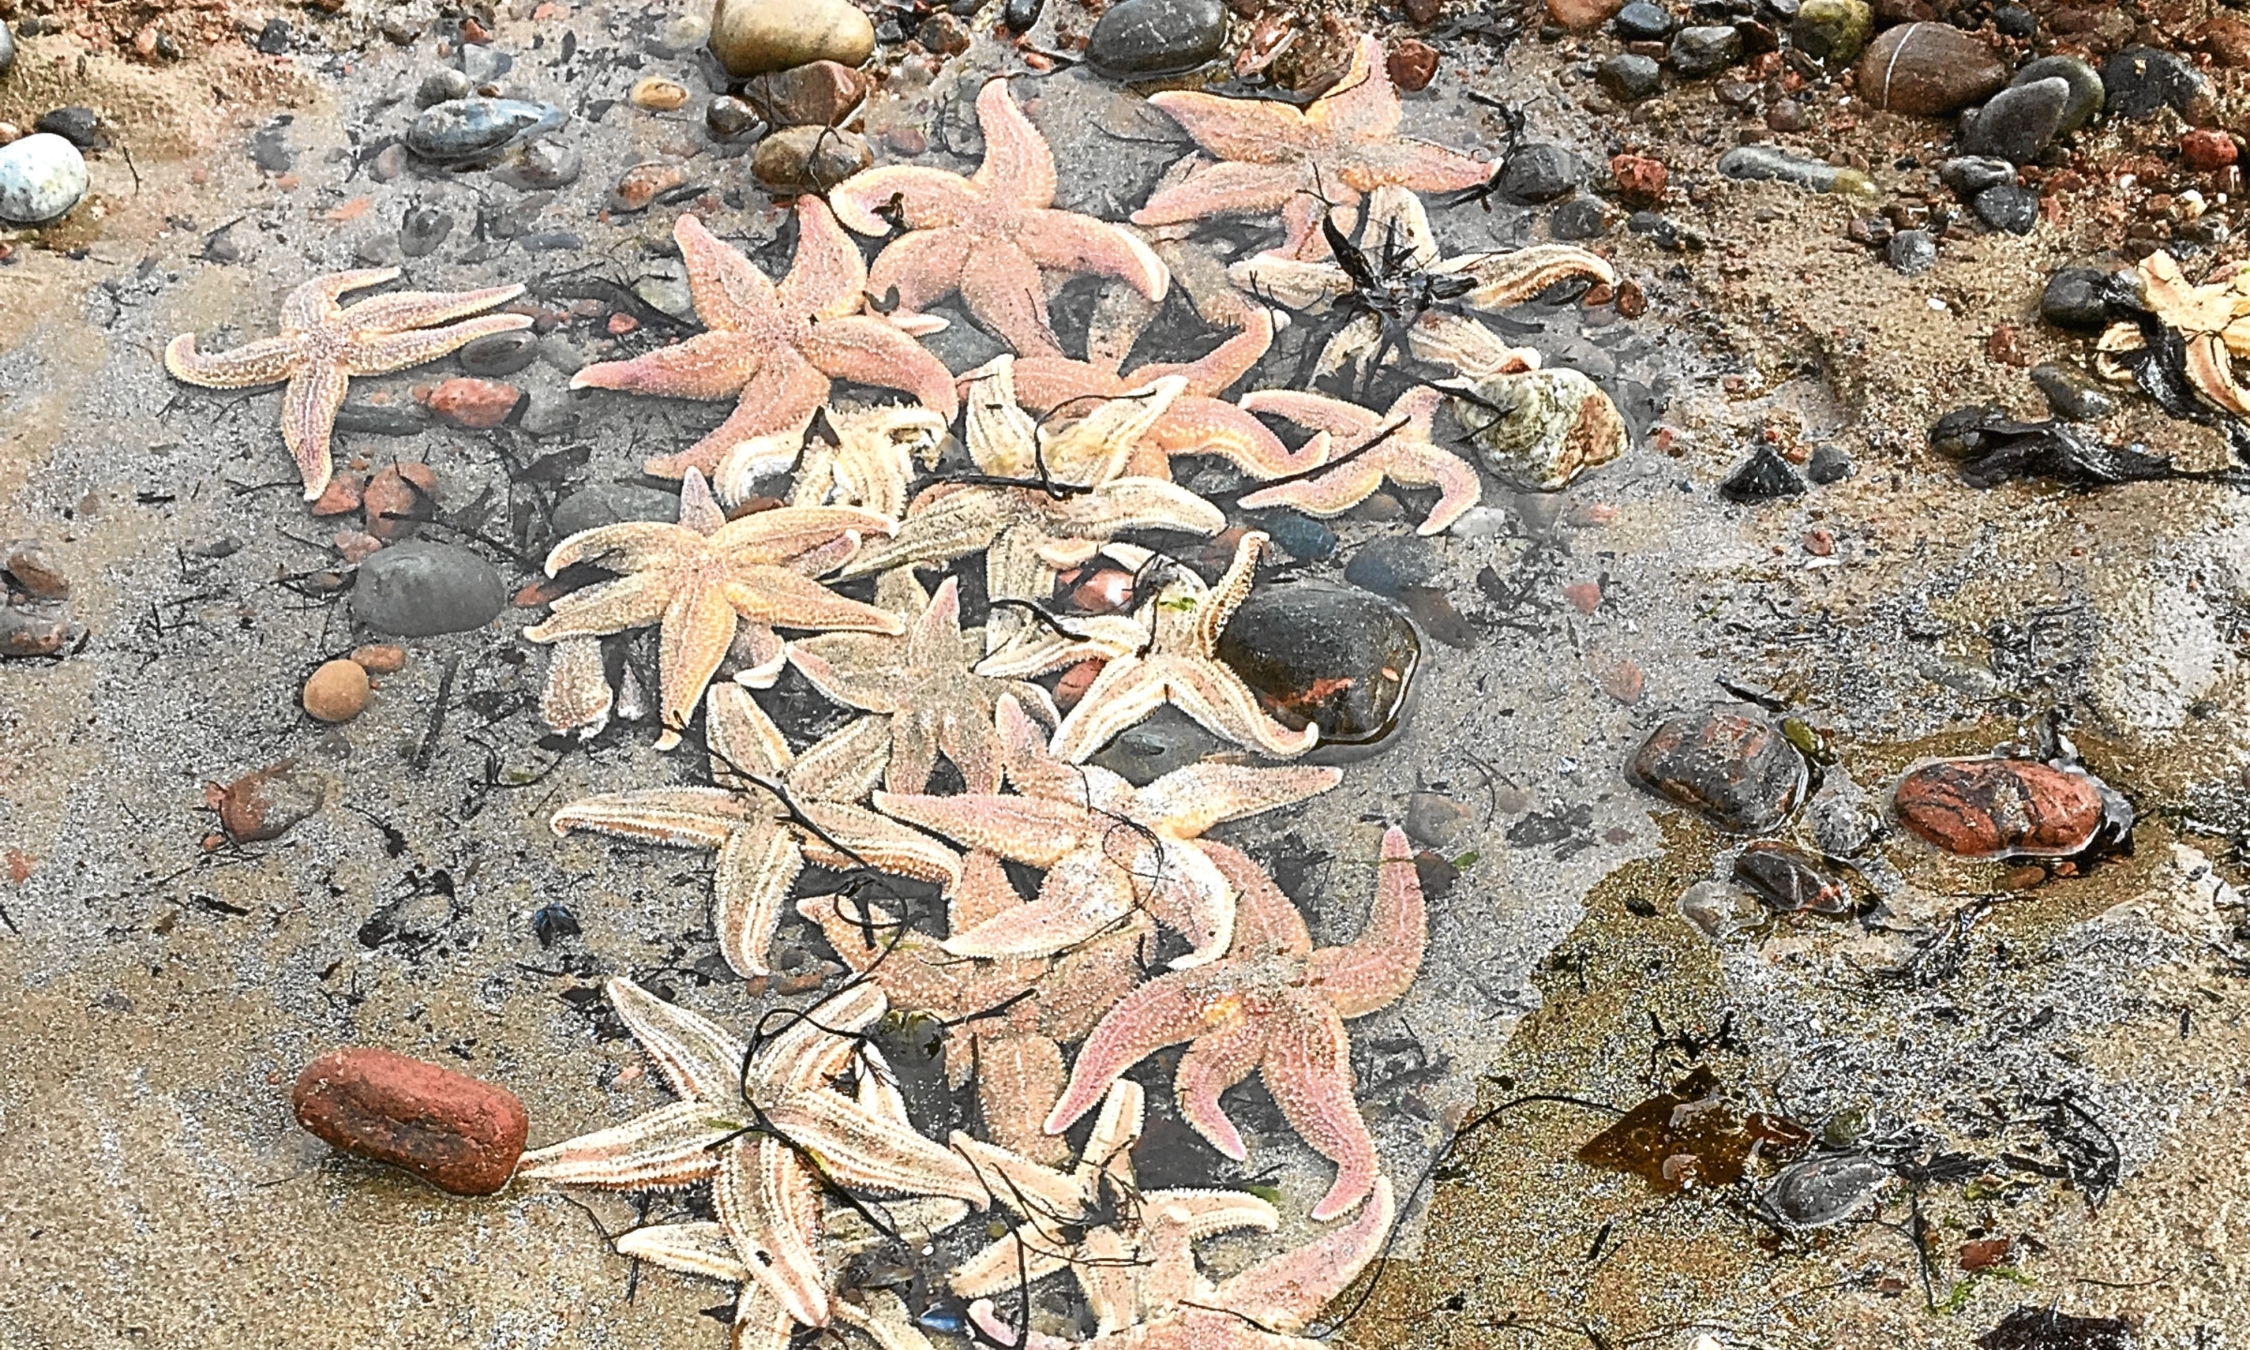 Starfish washed up and stranded on Rosemarkie beach.